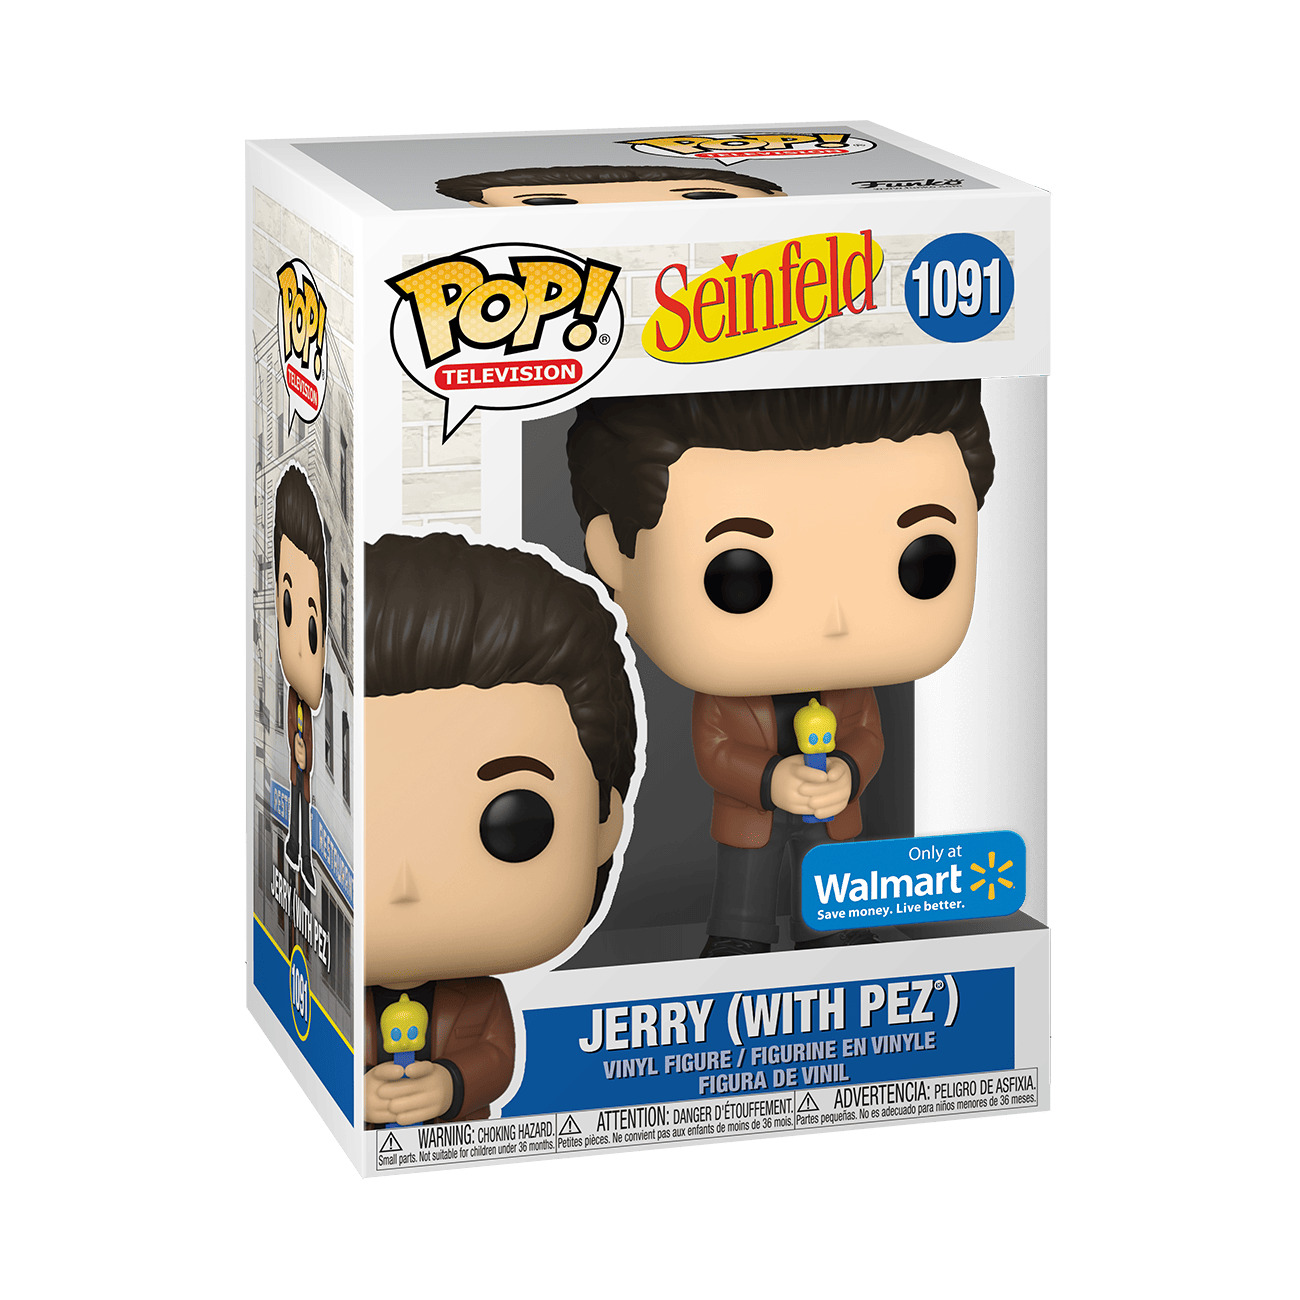 Funko Pop Television Jerry Seinfeld (With PEZ) #1091 Exclusive UNOPENED